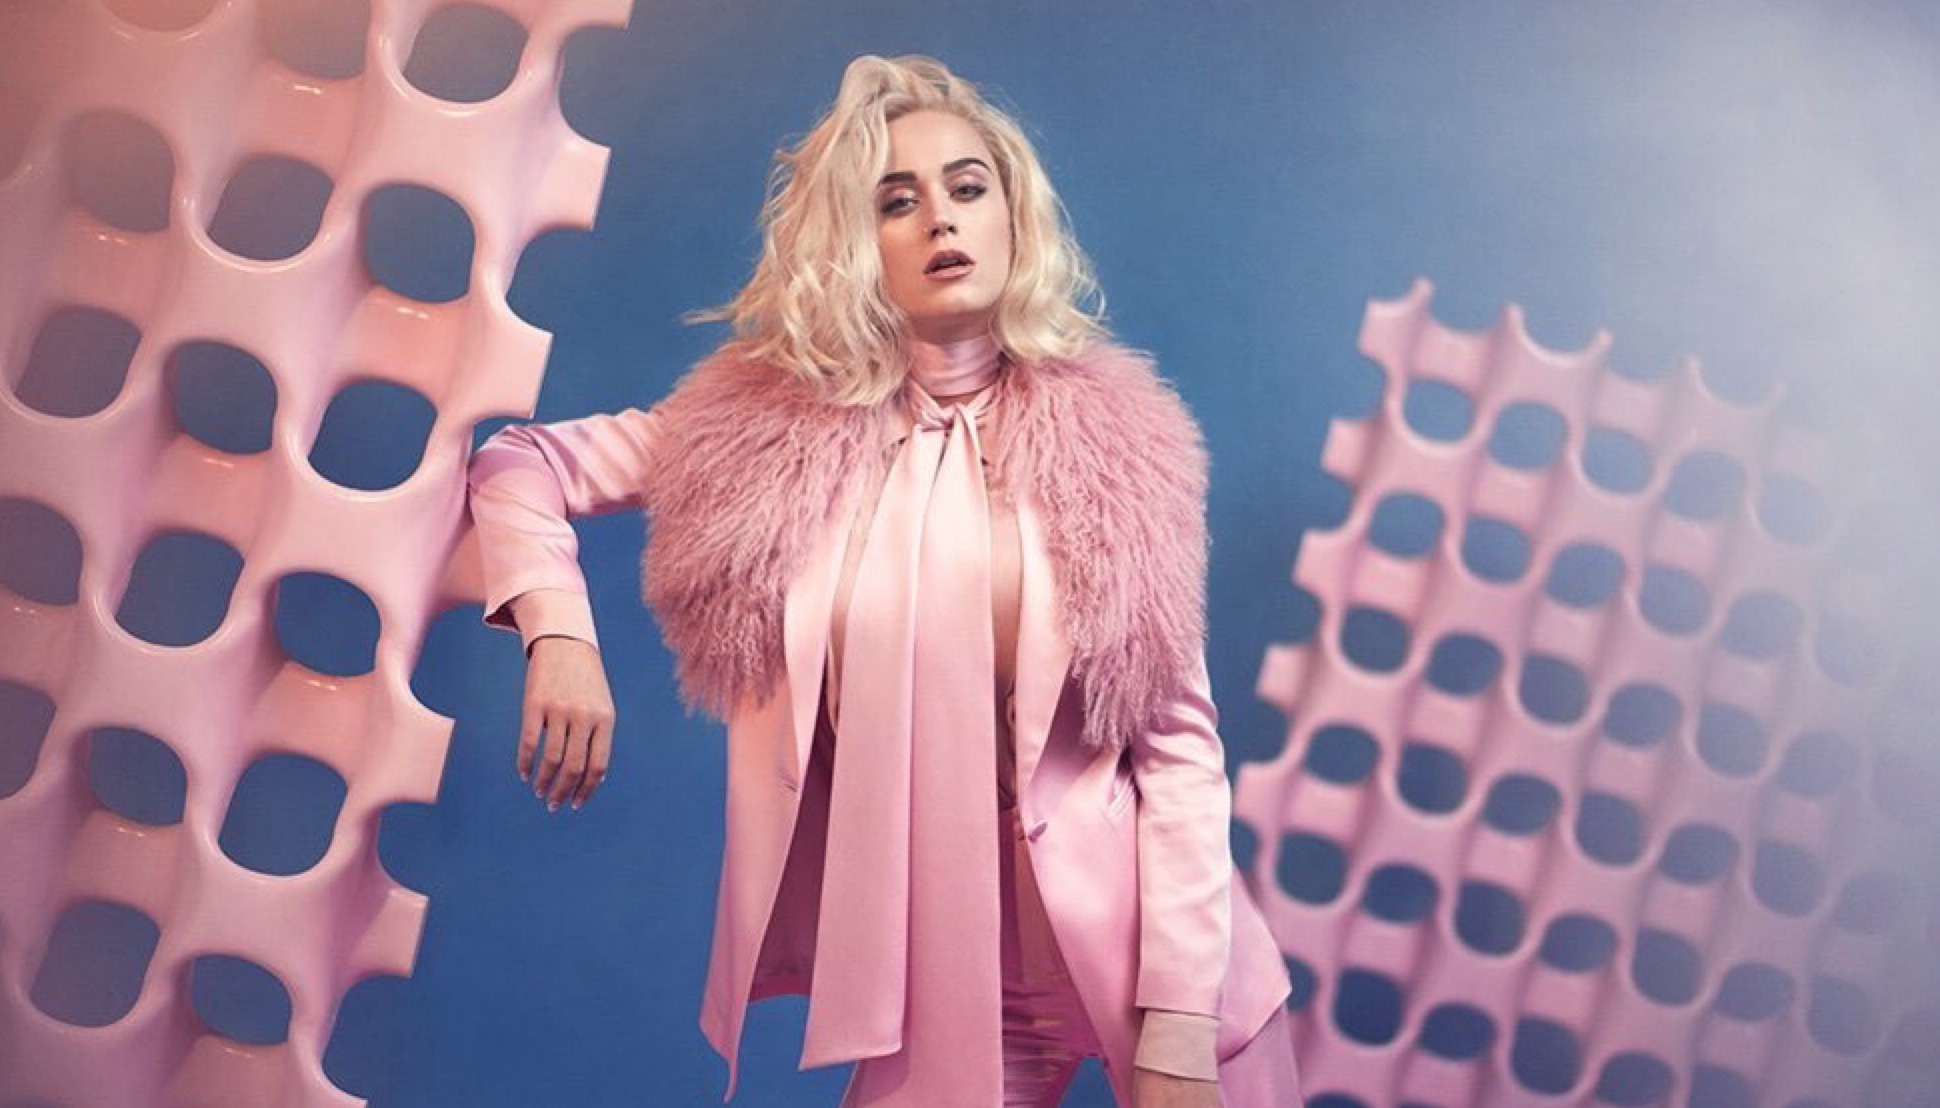  Ya puedes escuchar ‘Chained To The Rhythm’, el single que nos devuelve a Katy Perry